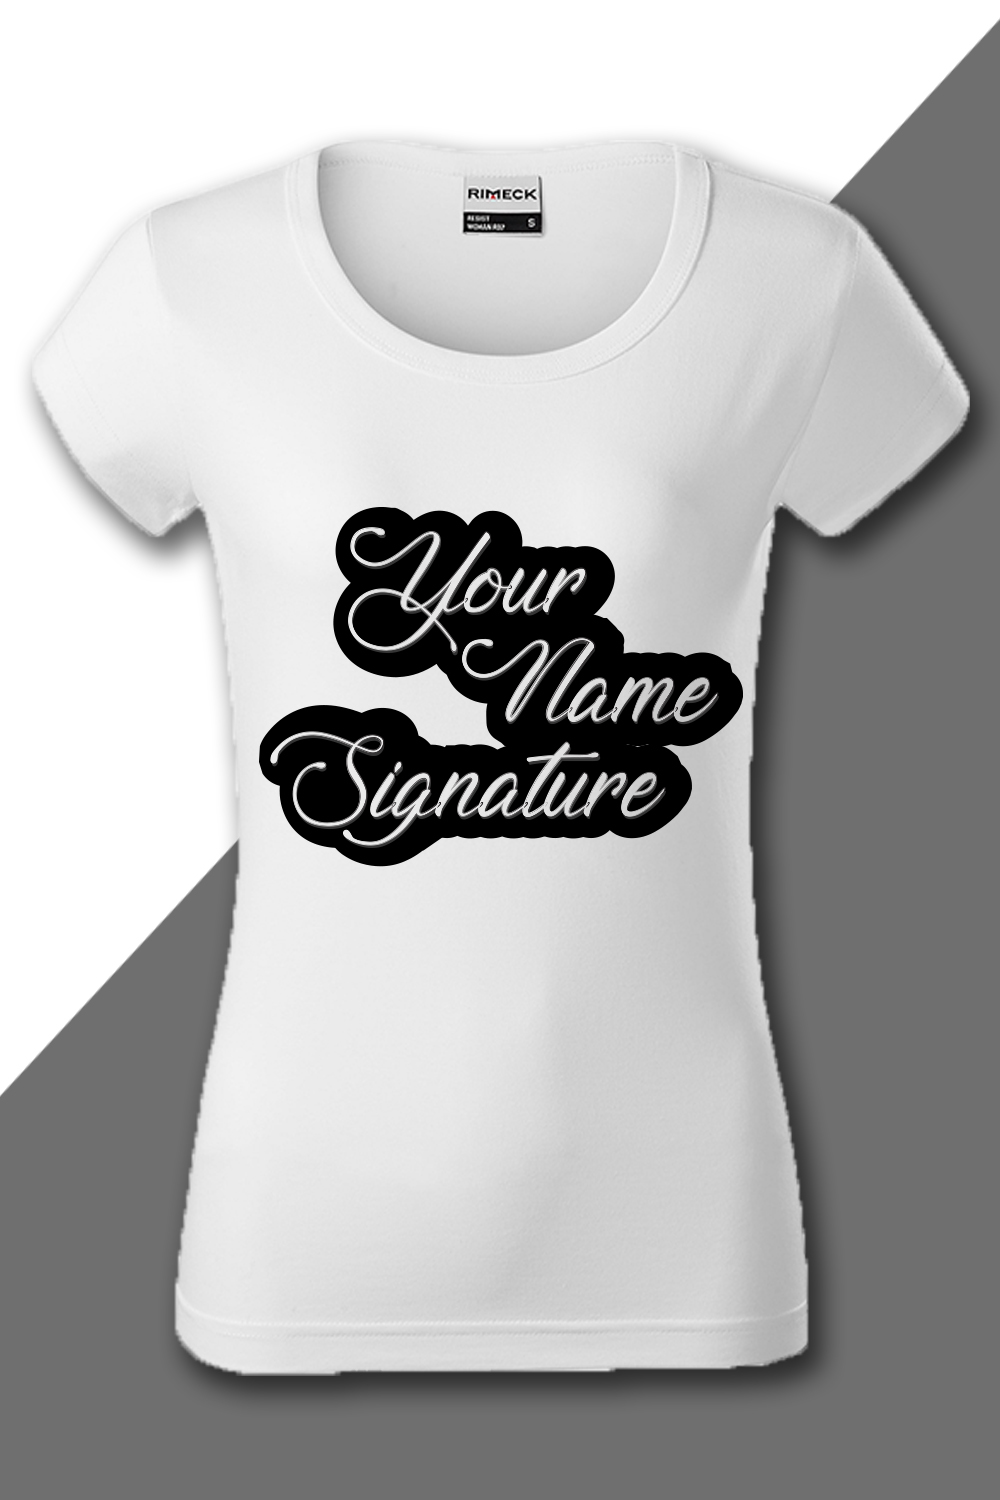 Image of a white t-shirt with an exquisite inscription your name signature